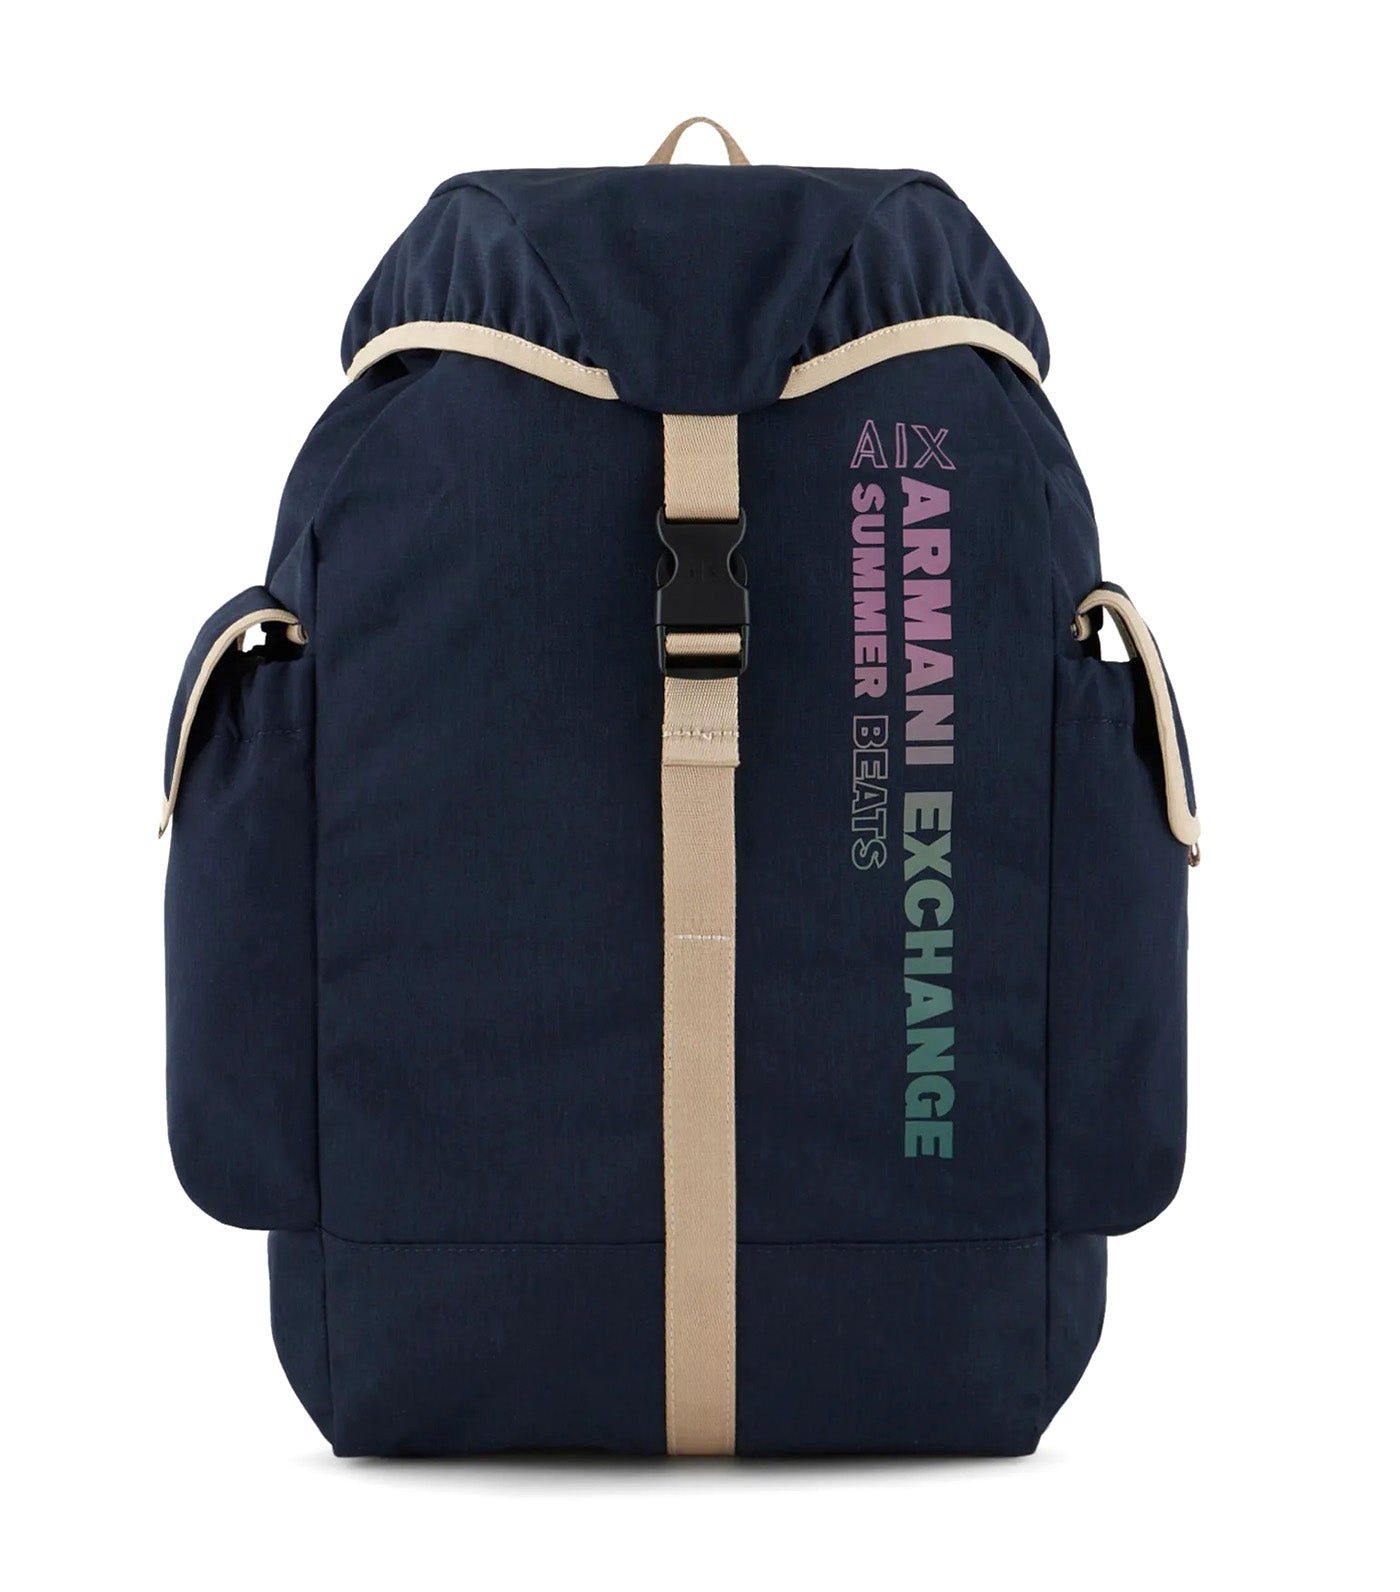 Recycled Fabric Backpack Blue Navy